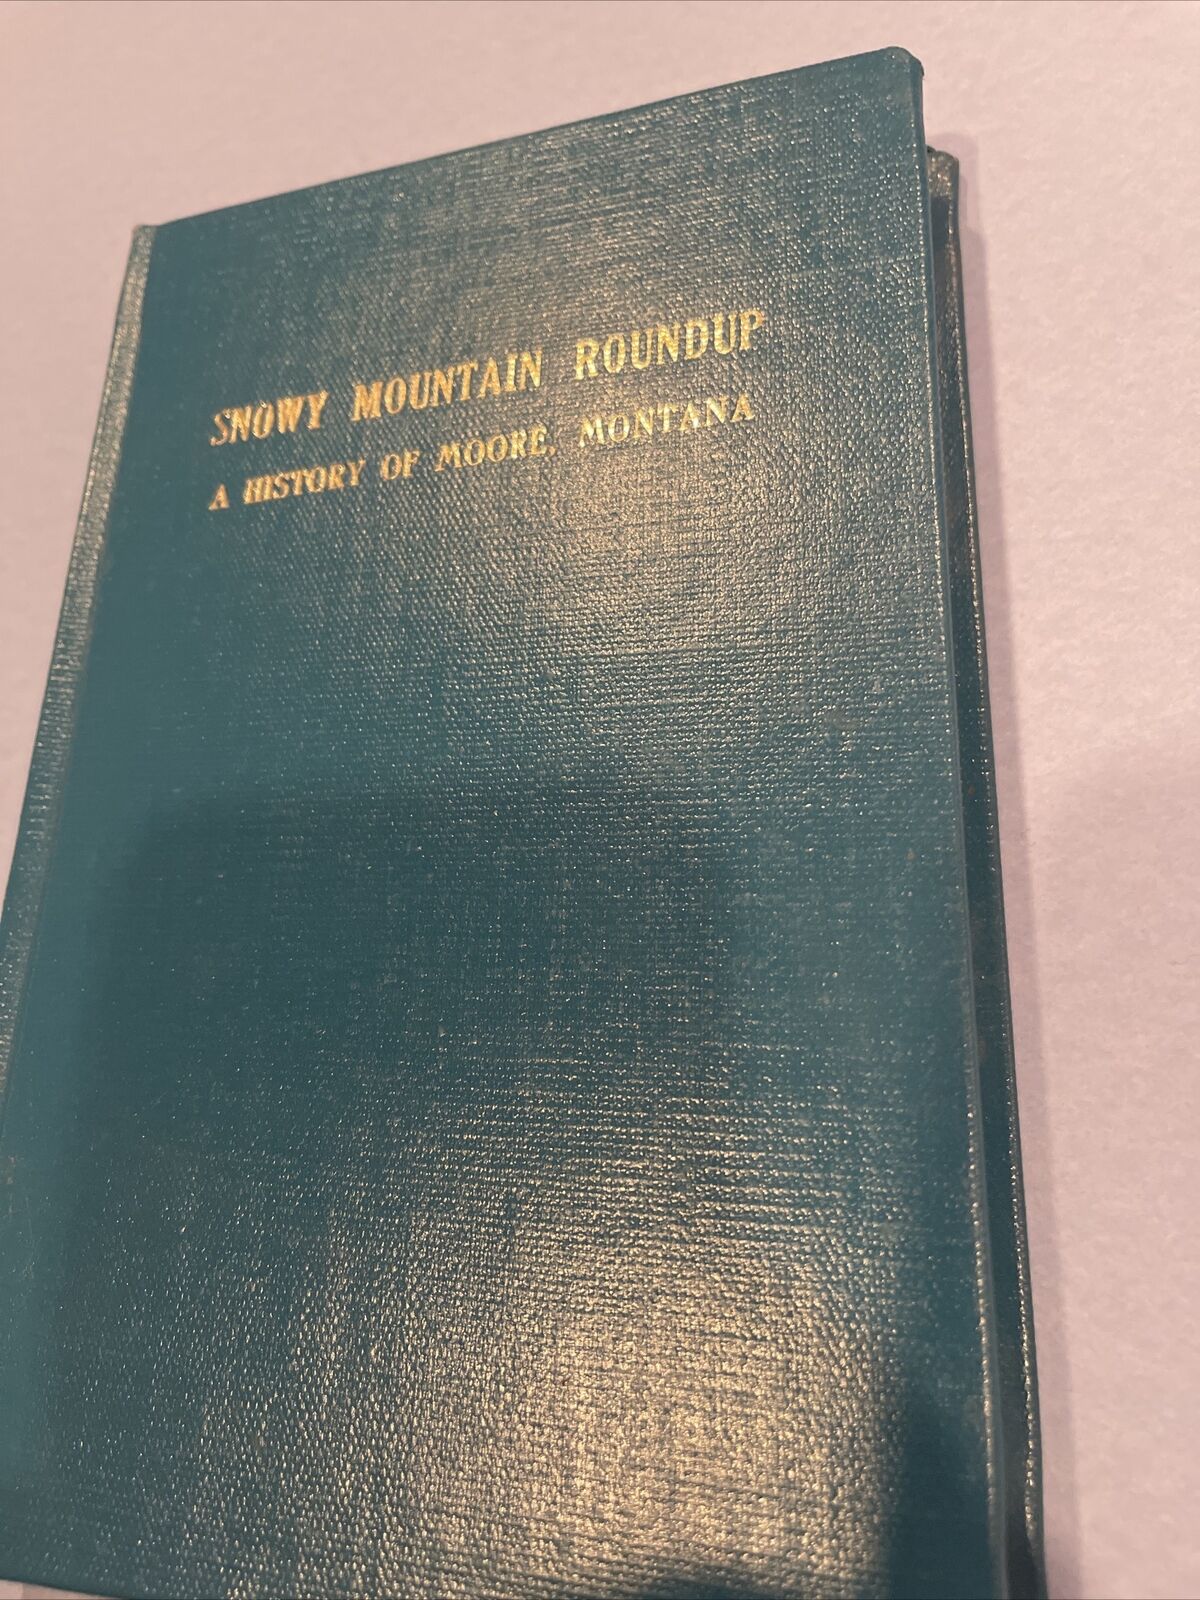 Snowy Mountain Roundup A History Of Moore, Montana